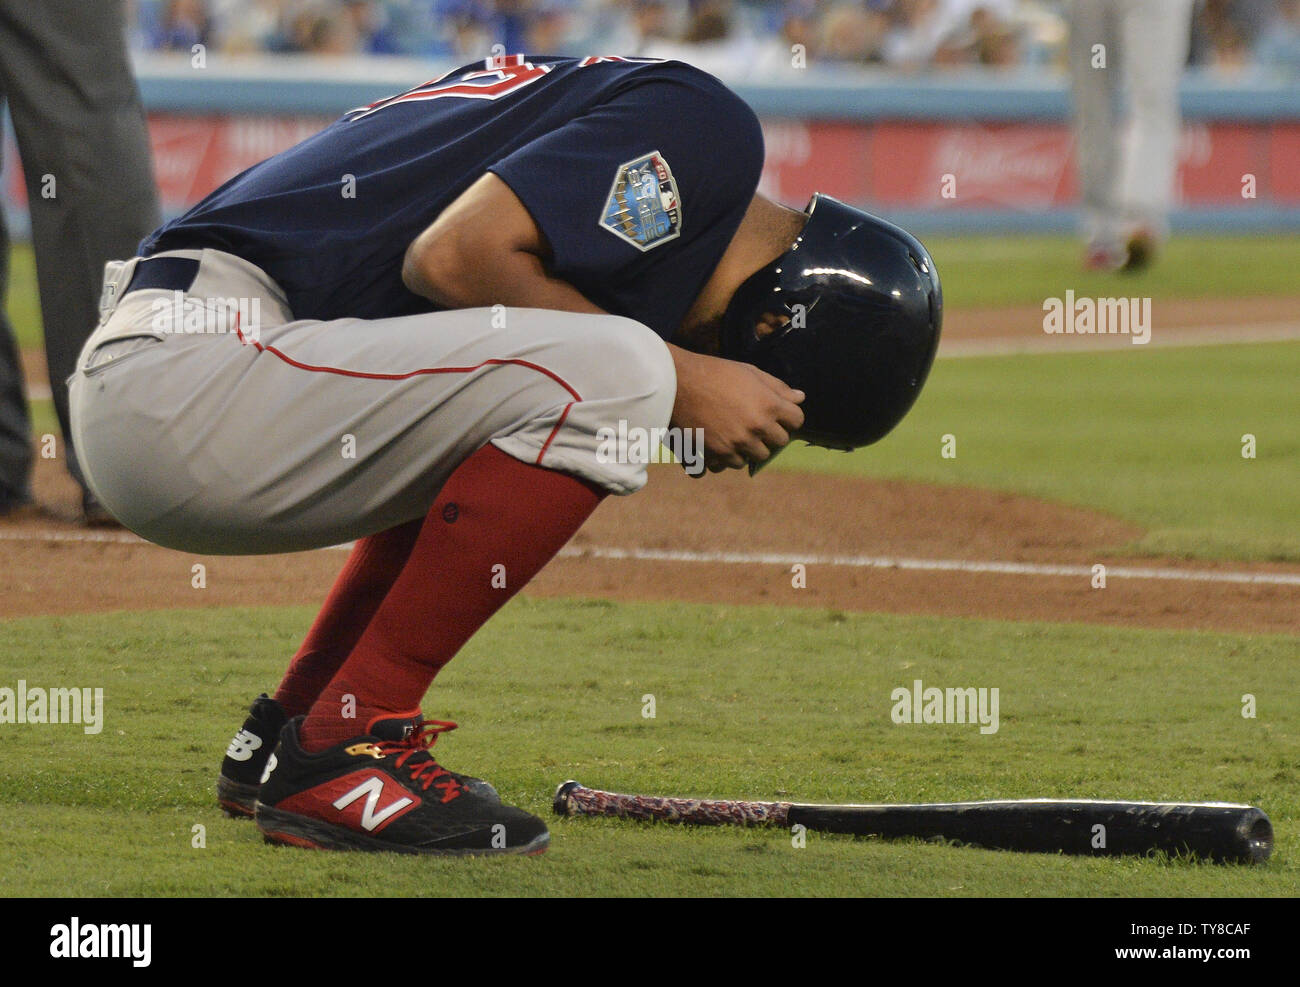 Boston Red Sox starting pitcher Eduardo Rodriguez reacts after being hit near the right elbow on a pitch from Los Angeles Dodger pitcher Rich Hill during the third inning in game four of the MLB 2018 World Series at Dodger Stadium in Los Angeles on October 27, 2018.  The Red Sox hold a 2-1 series lead over the Dodgers.  Photo by Jim Ruymen/UPI Stock Photo